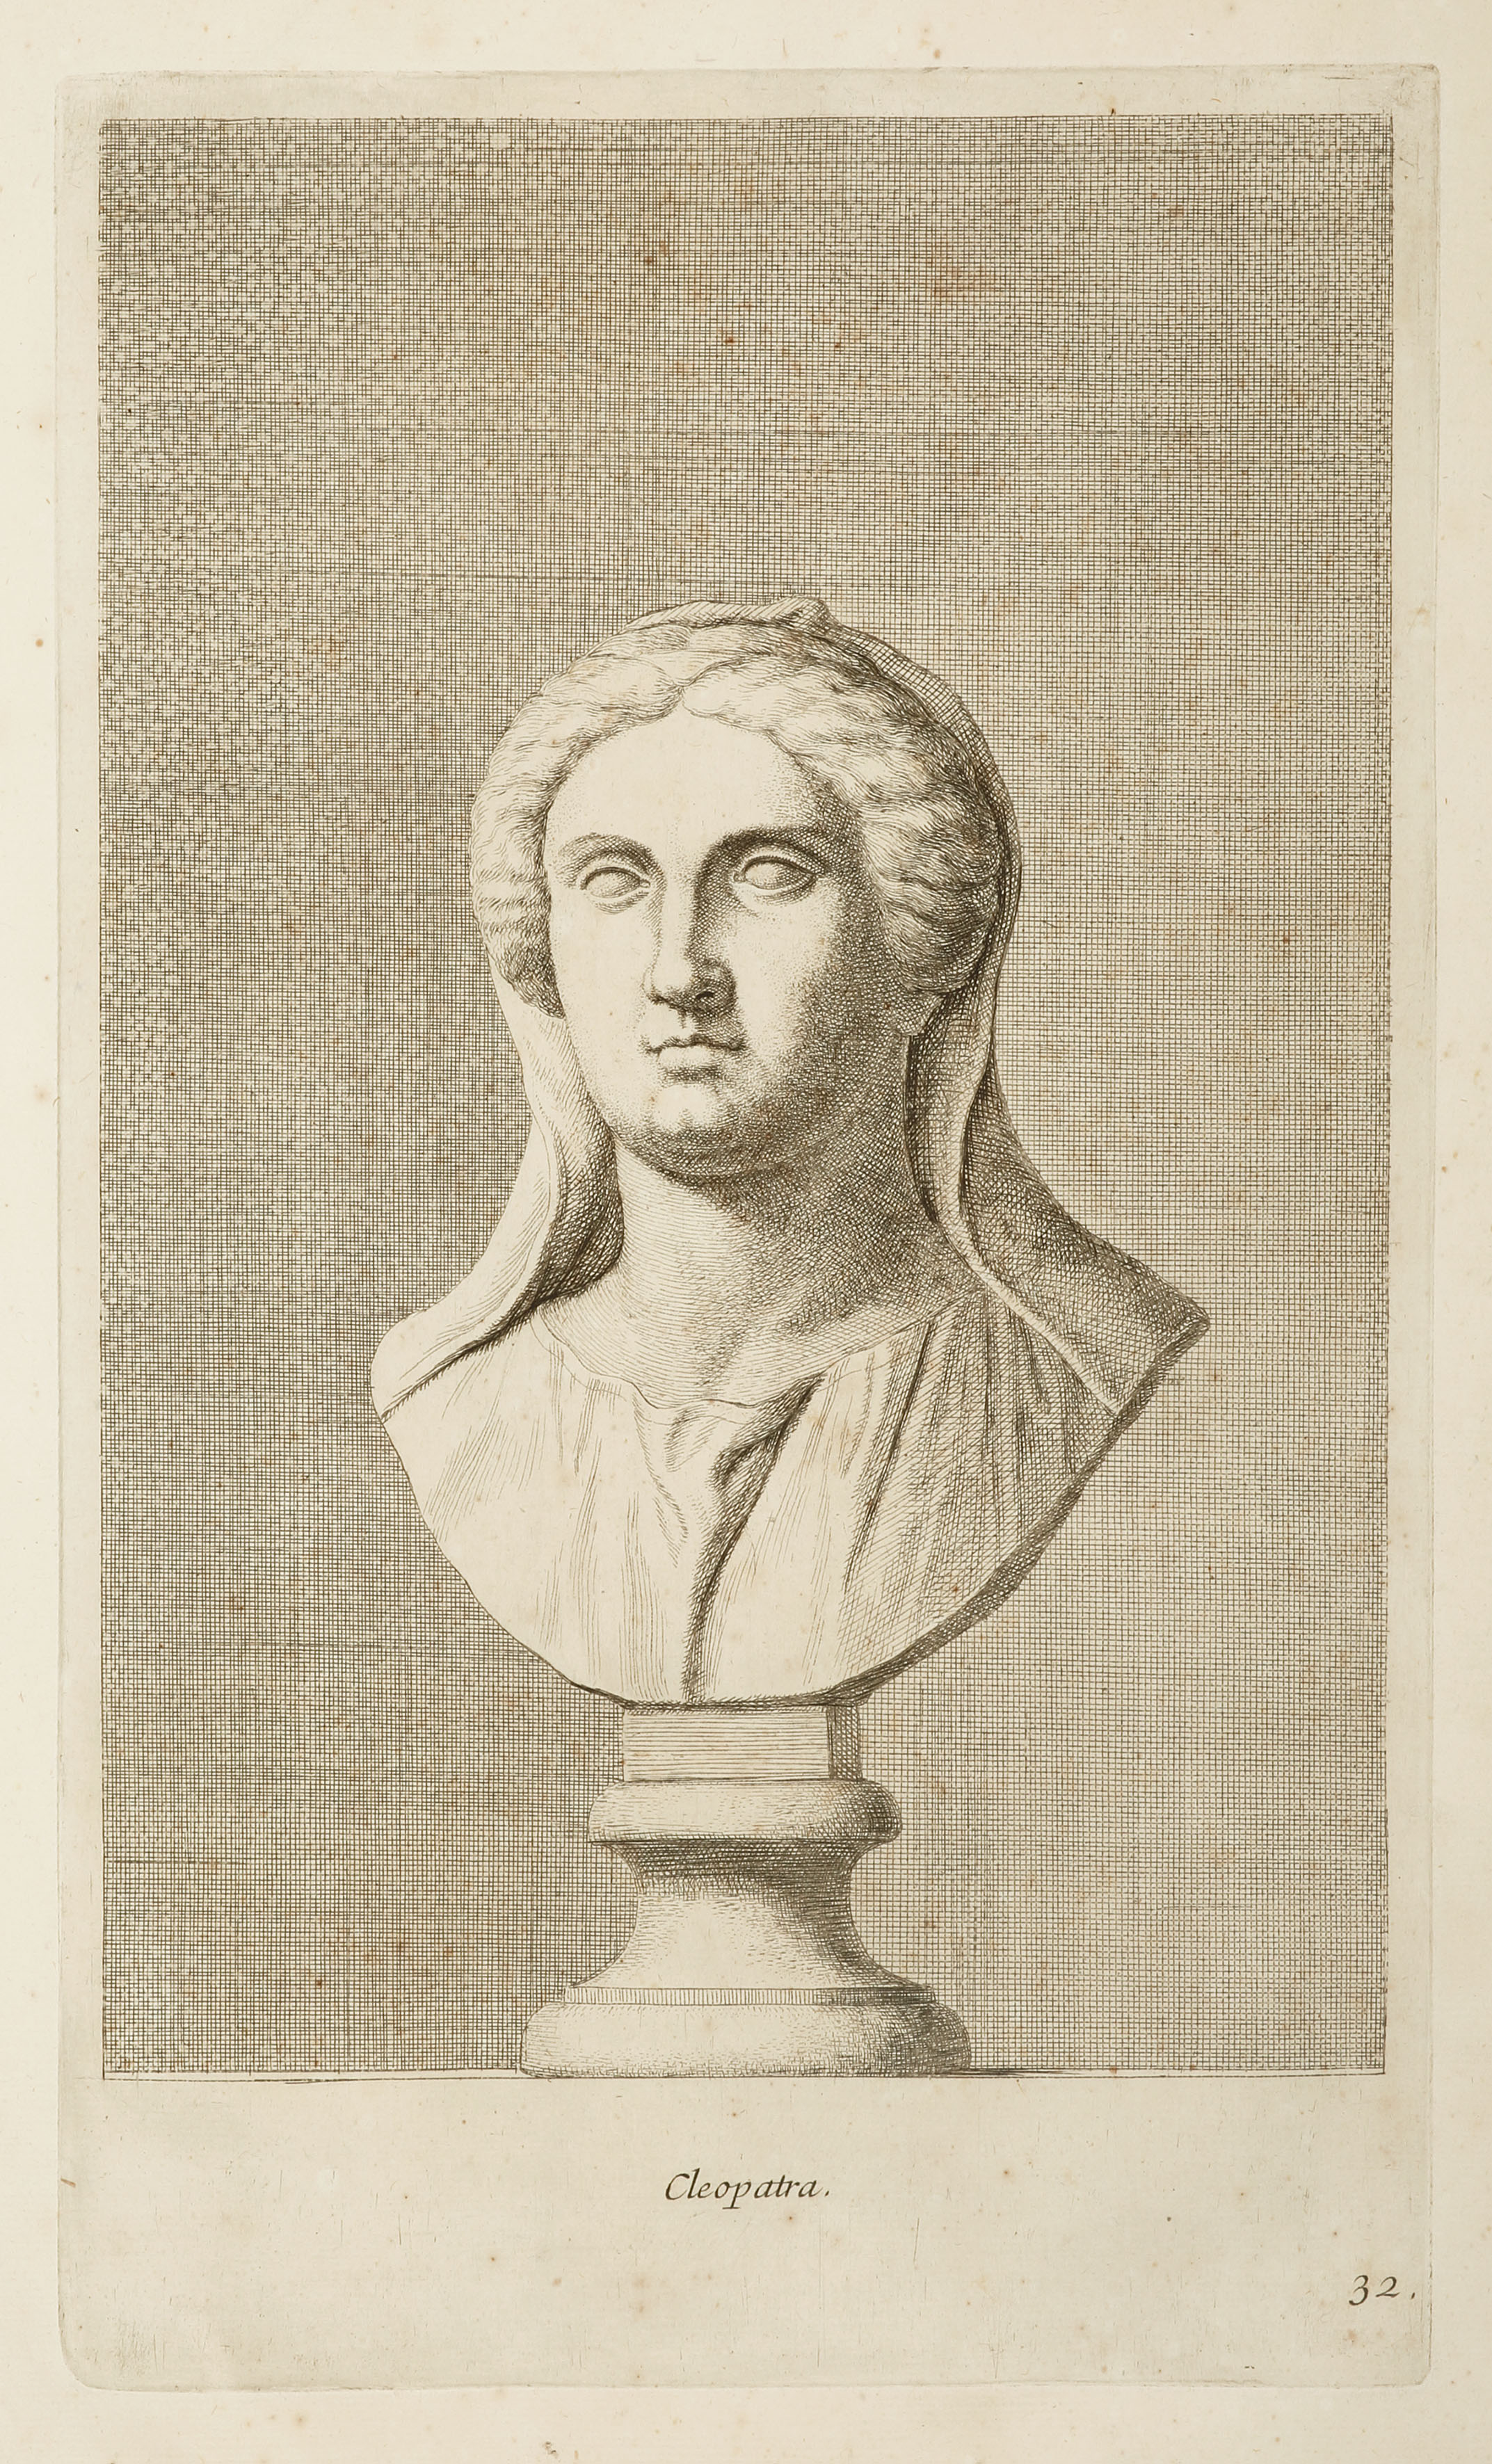 Cleopatra - Antique Print from 1671